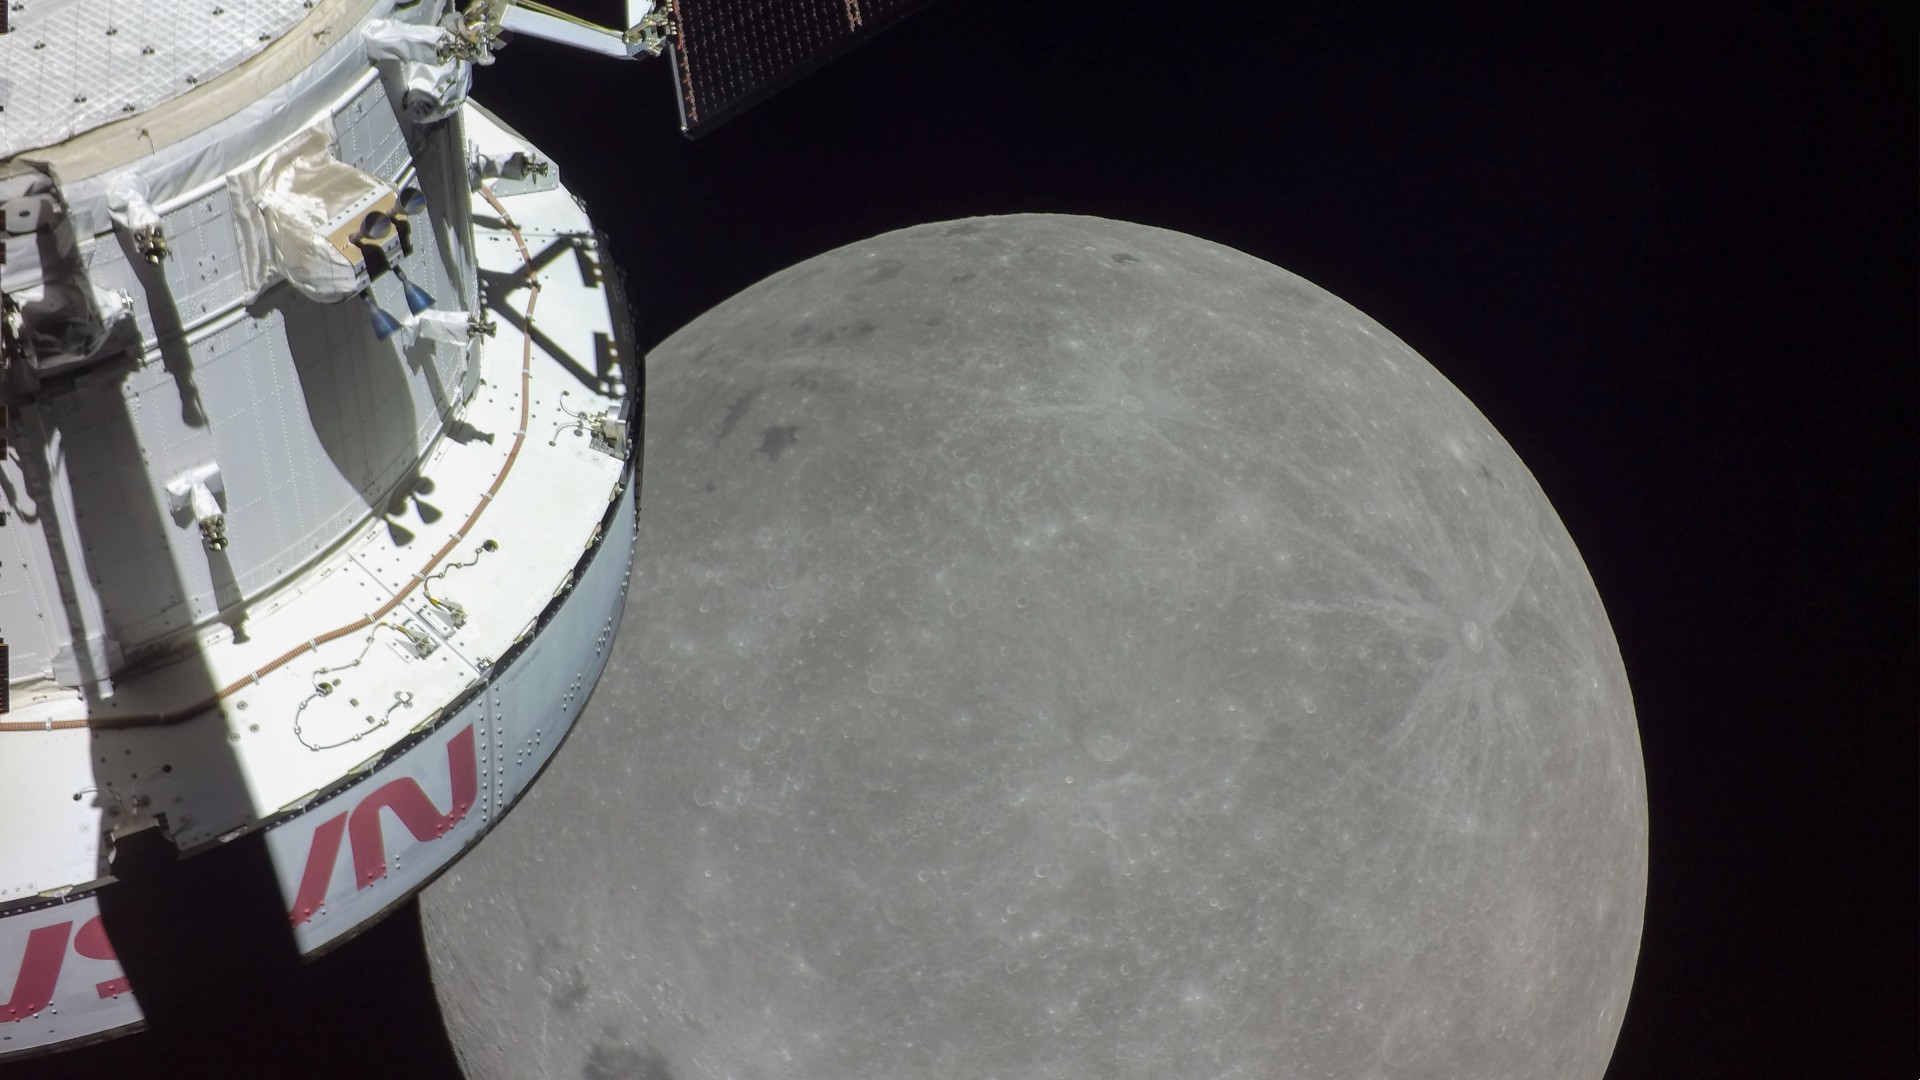 Relive NASA's historic Artemis 1 moon mission in this mini-doc (video)